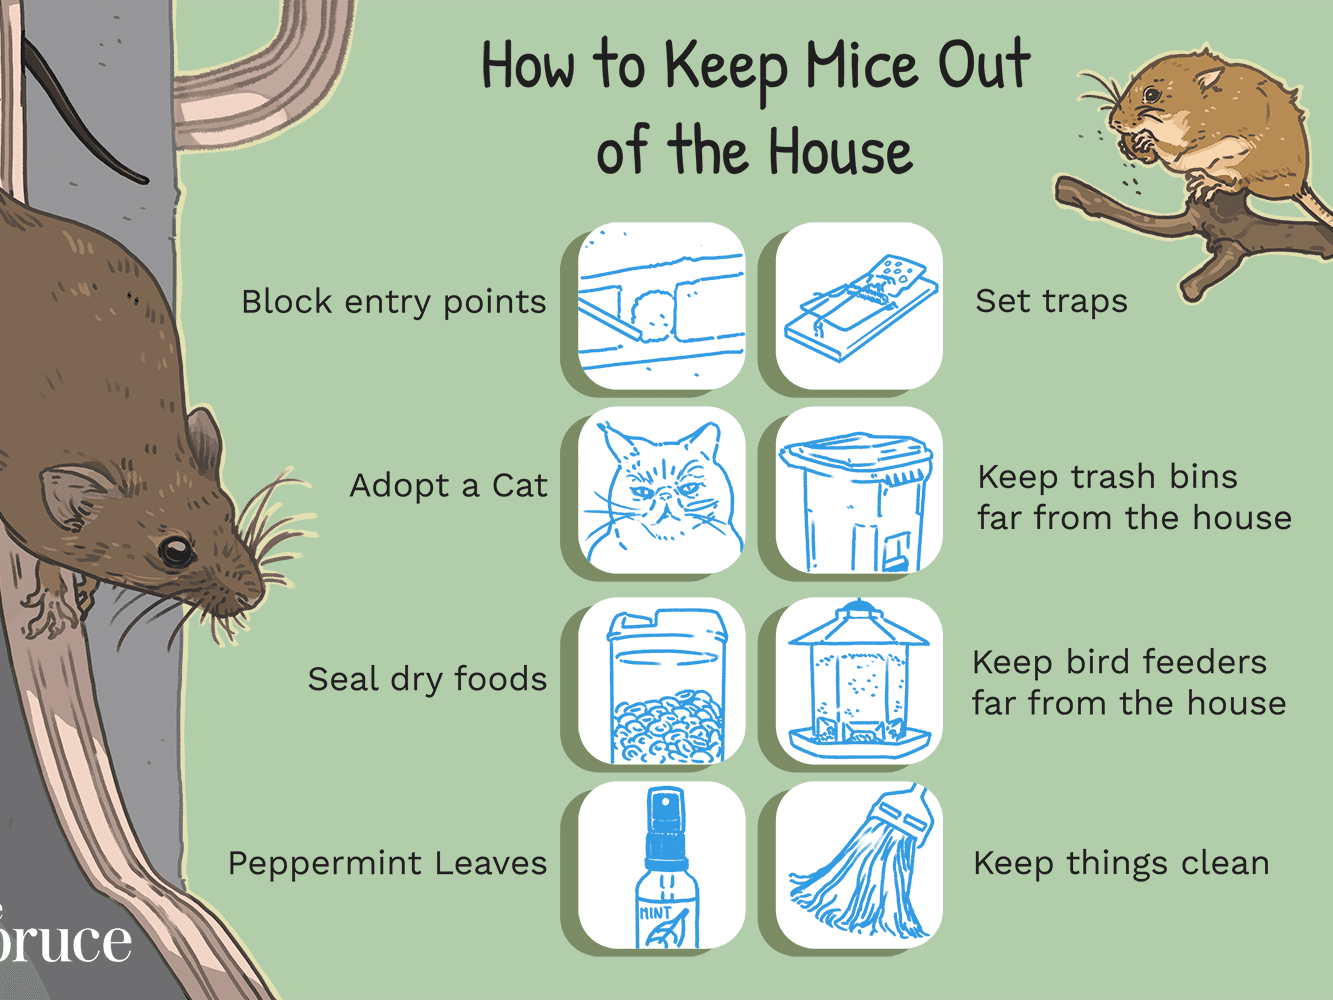 What will keep mice away naturally?